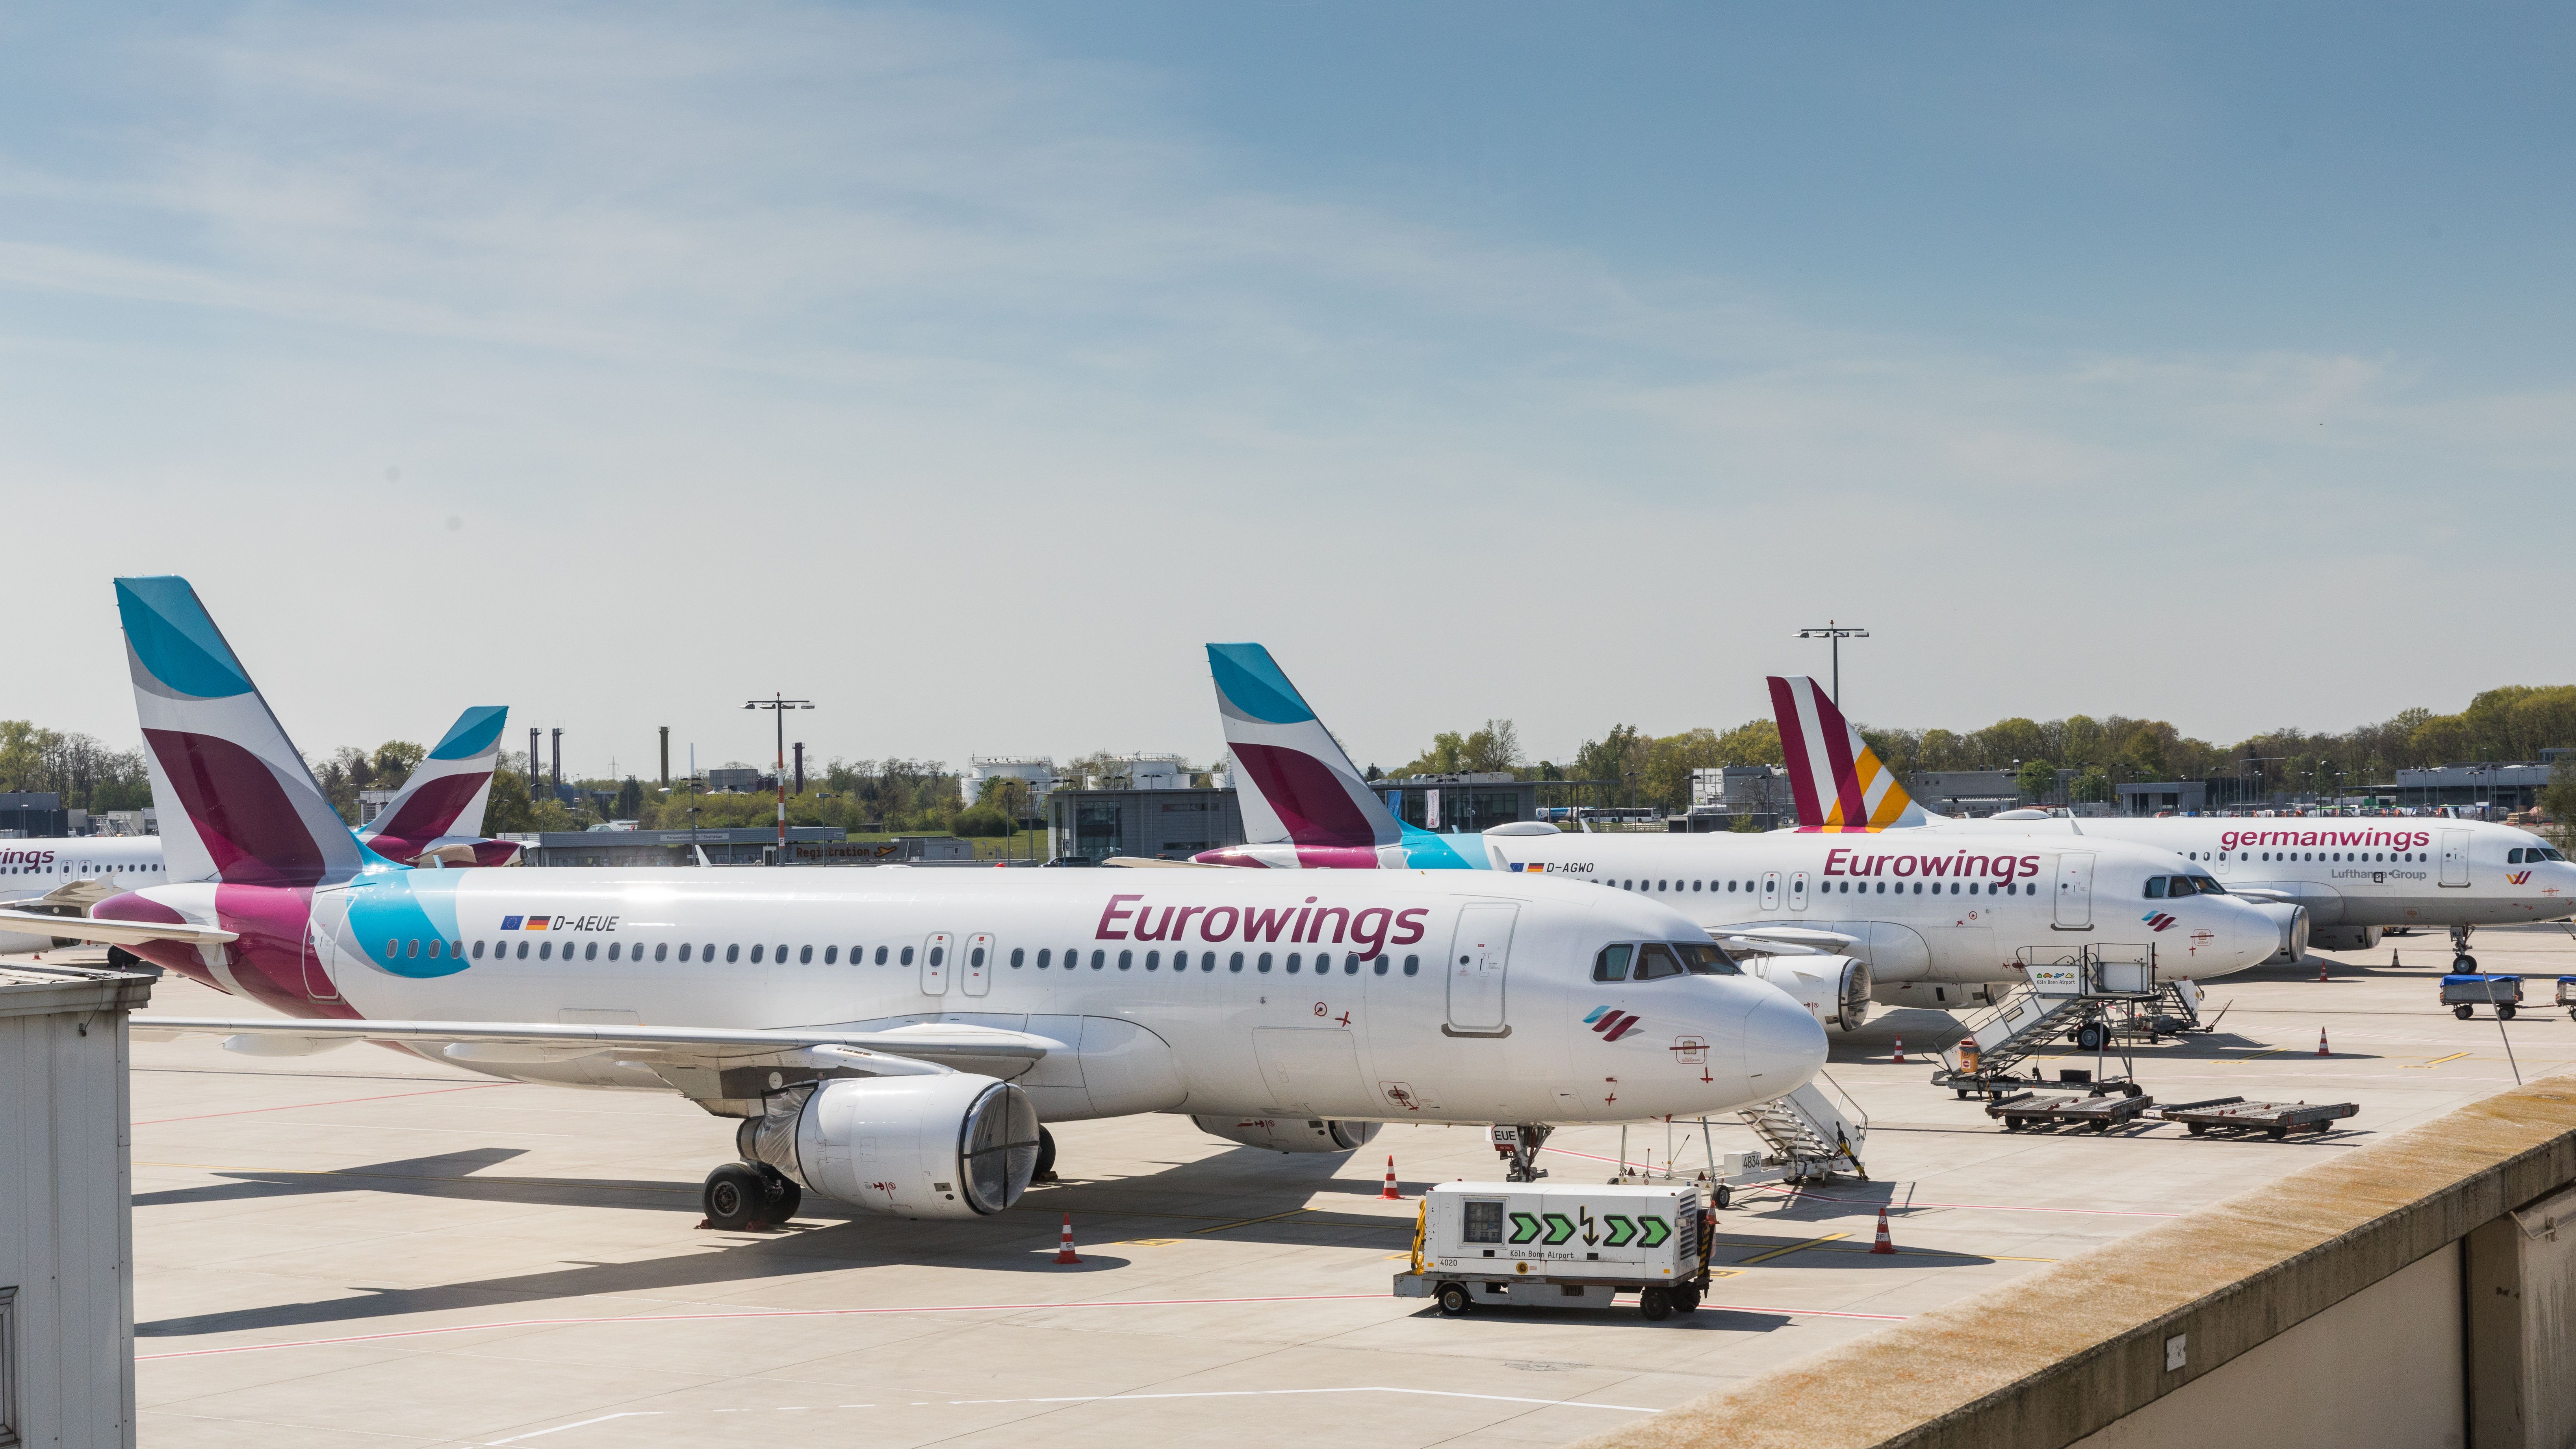 Eurowings_-_Airbus_A320_-_D-AEUE_and_Eurowings_-_Airbus_A319_-_D-AGWO_-_Cologne_Bonn_Airport